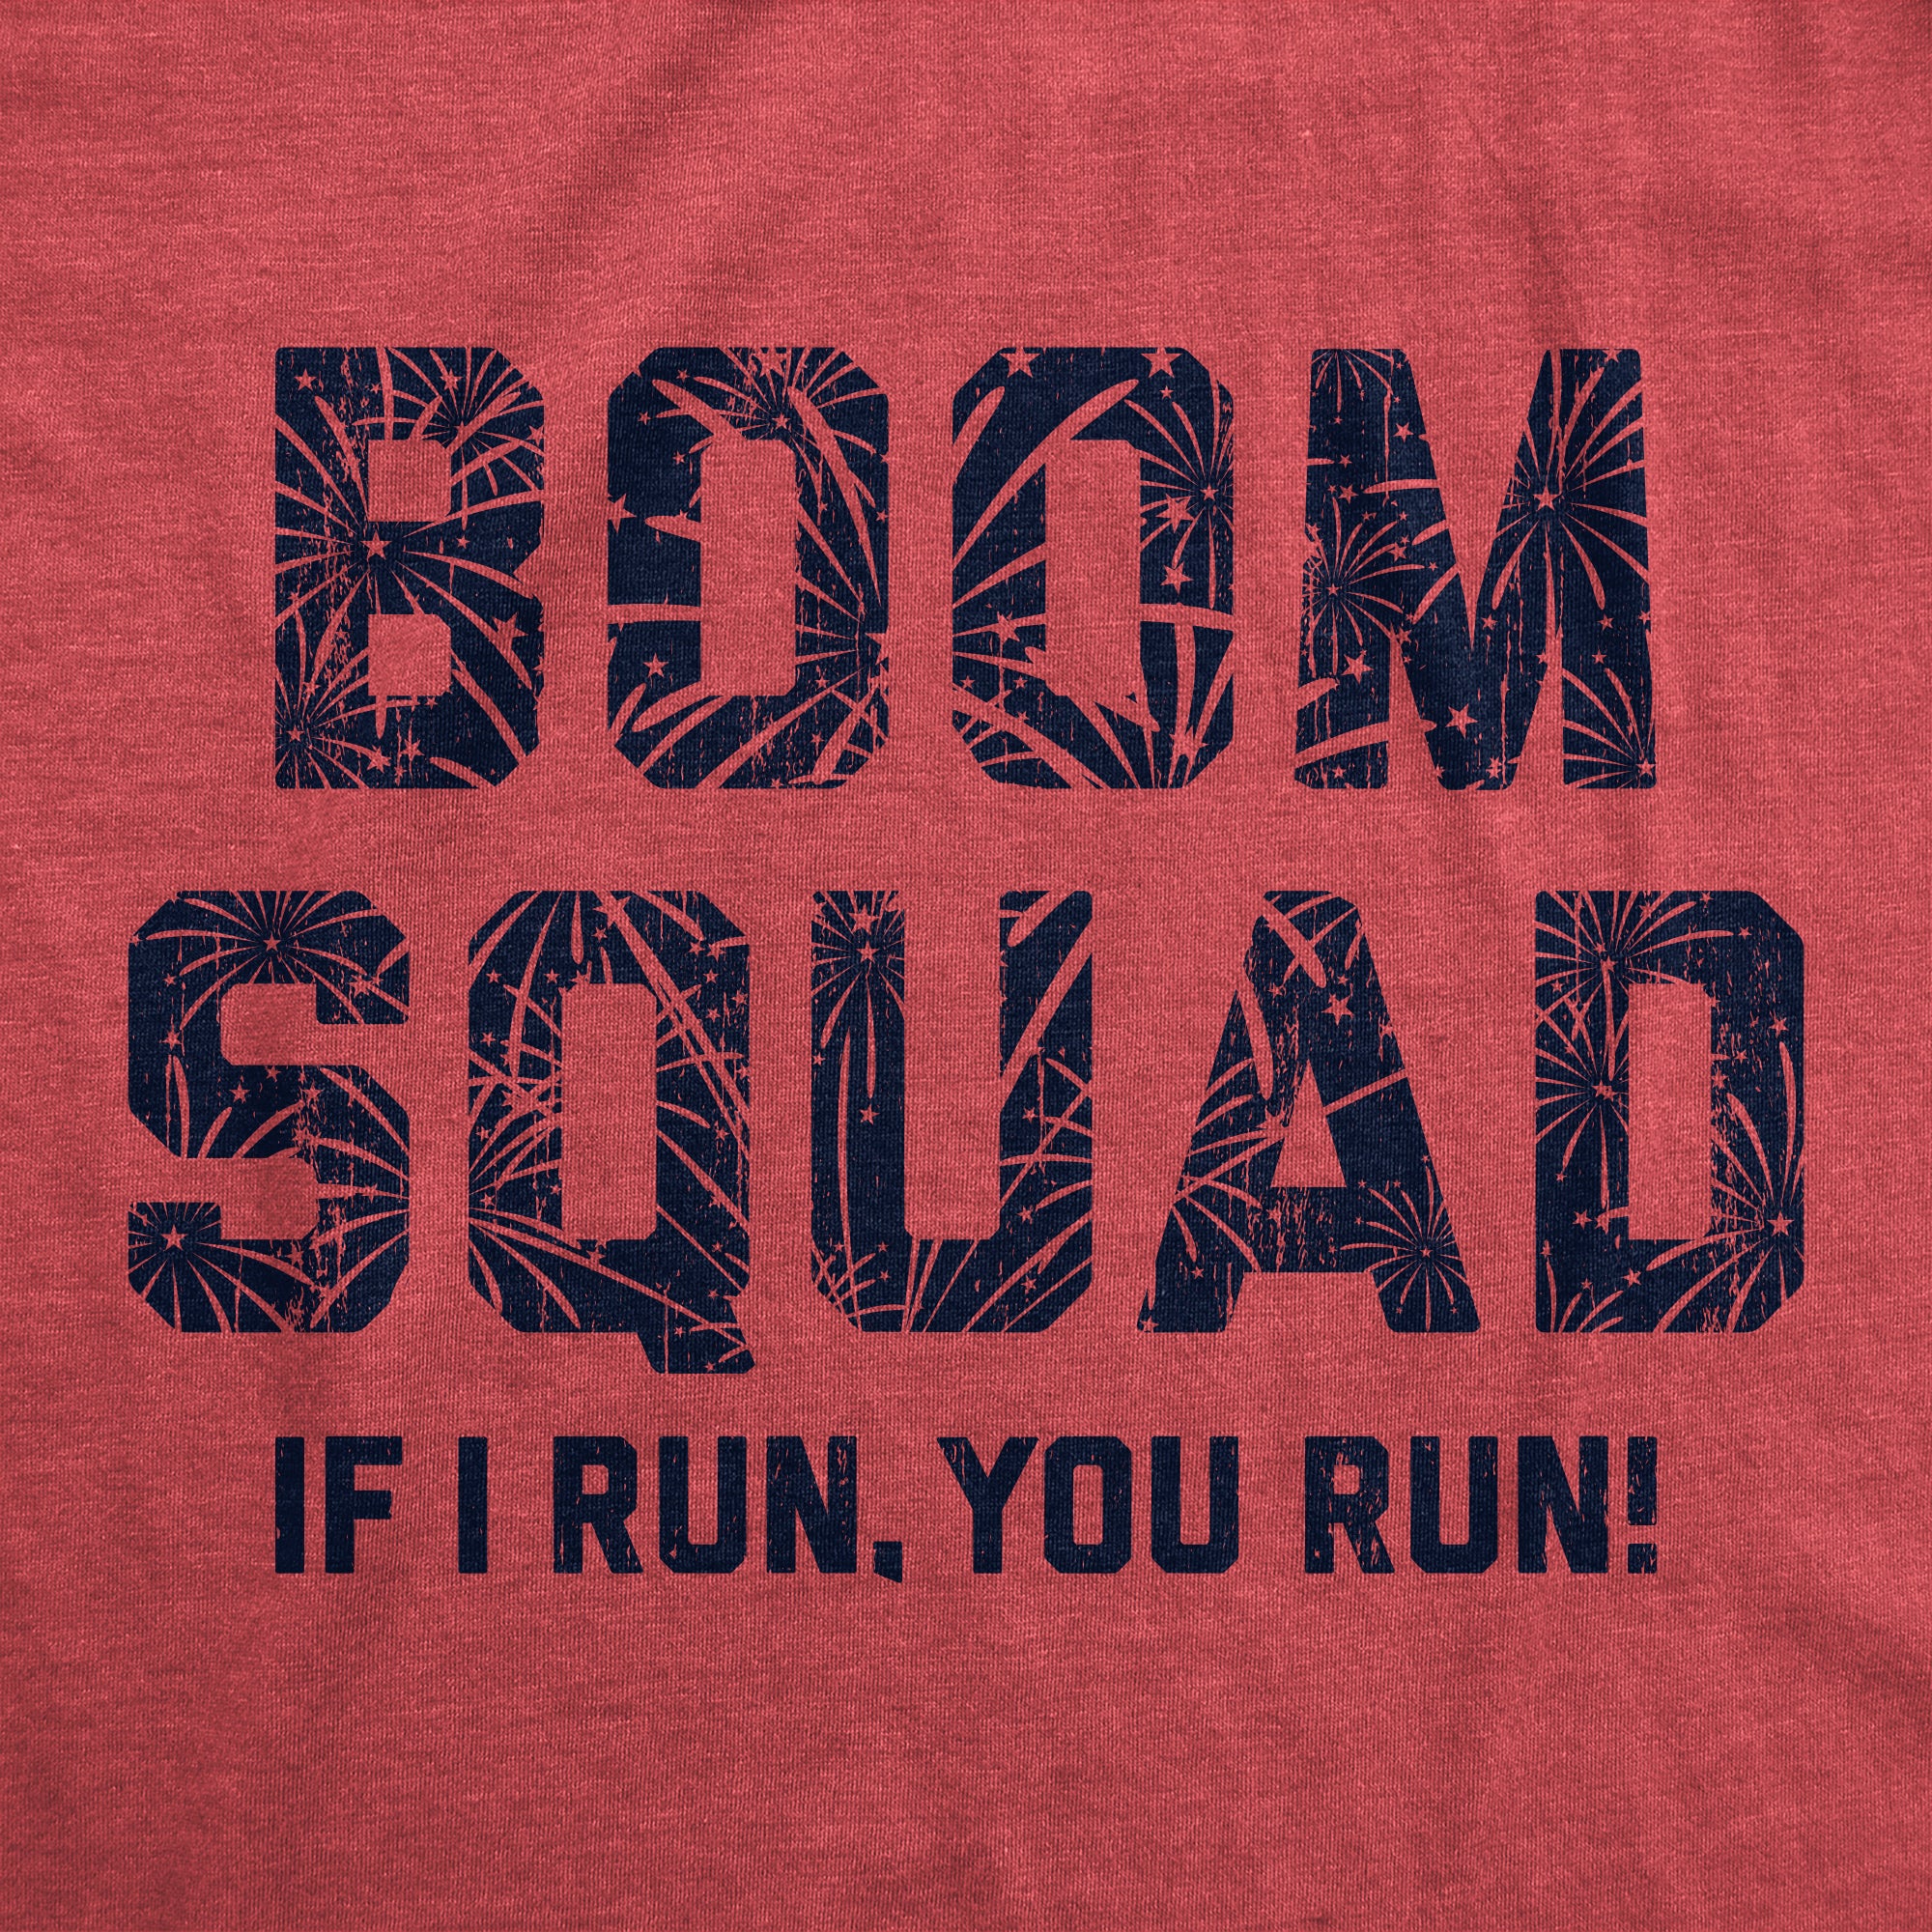 Funny Heather Red - Boom Squad Boom Squad Mens T Shirt Nerdy Fourth of July Sarcastic Tee